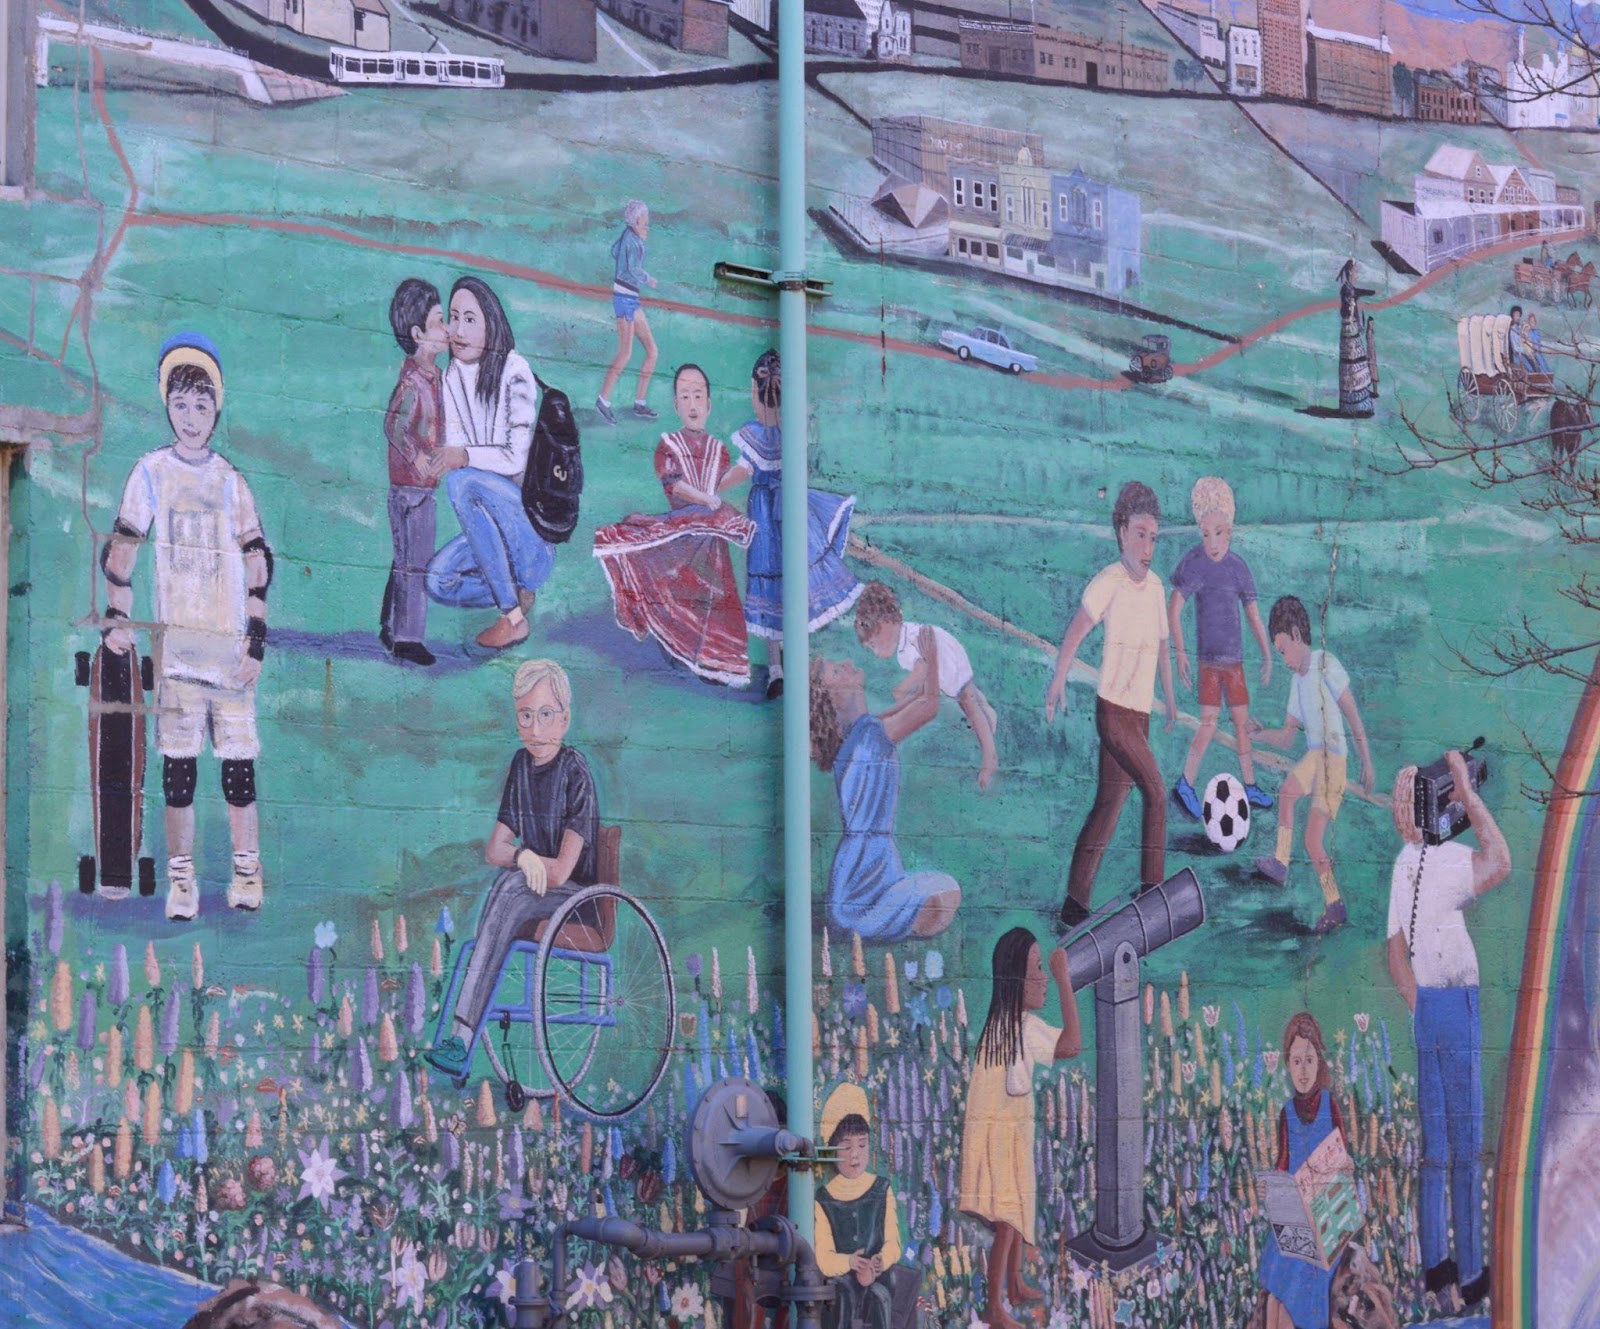 A close-up from Learning From the Past, Focused on the Future. This mural depicts many children in different scenarios, playing sports, using telescopes, skateboarding, etc.